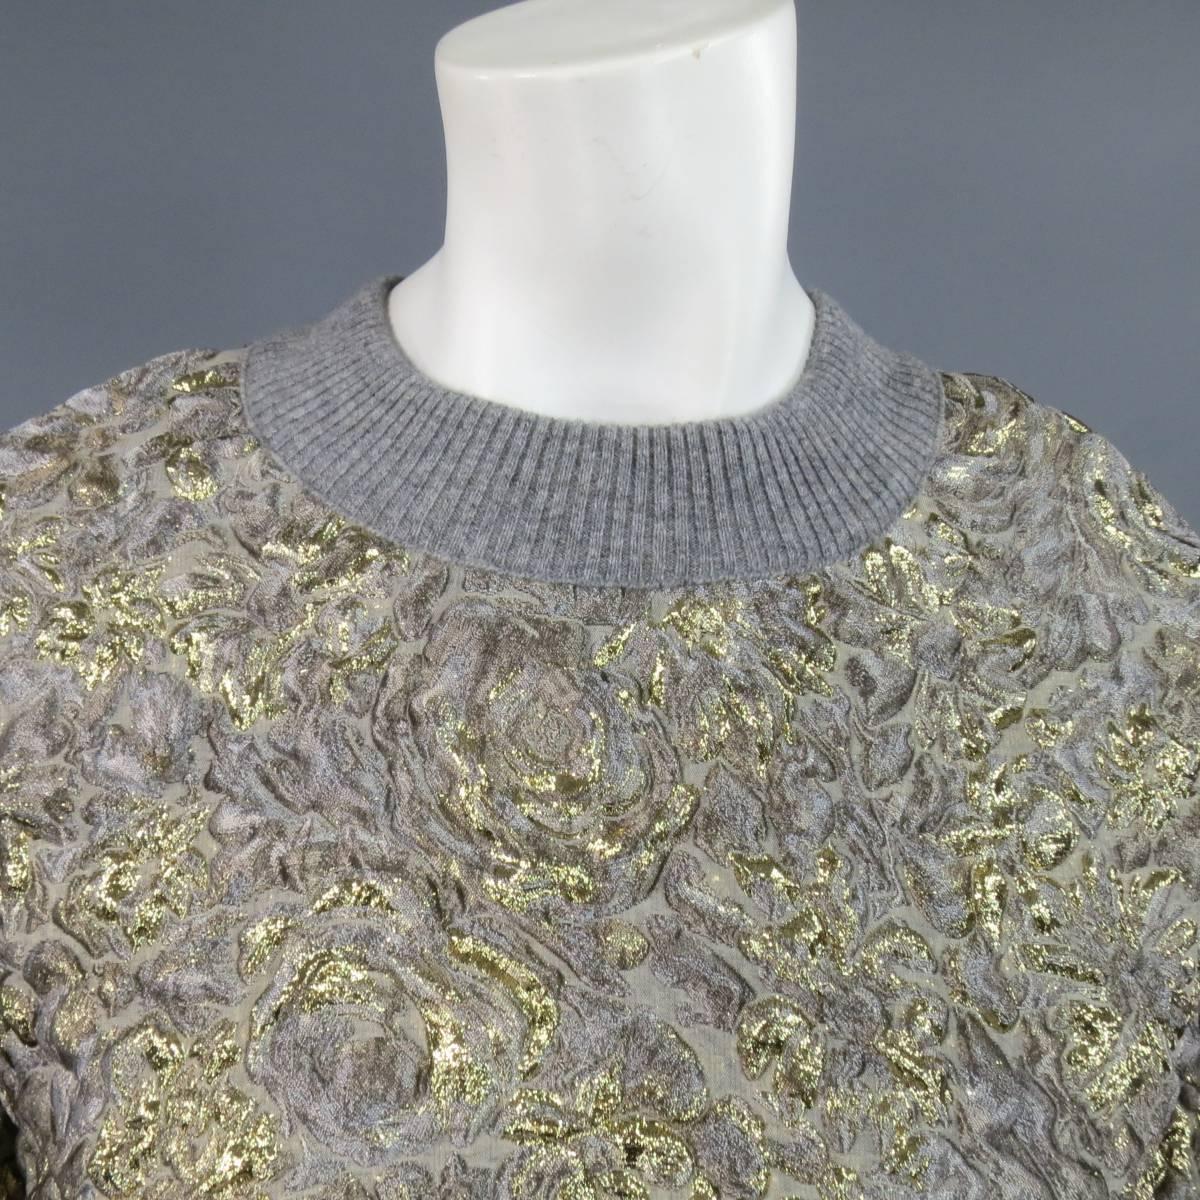 This fabulous DOLCE & GABBANA dress comes in a beautiful gray and gold metallic floral textured jacquard fabric and features a ribbed knit crewneck, oversized silhouette, and three quarter puff sleeves. Made in Italy.
 
Excellent Pre-Owned